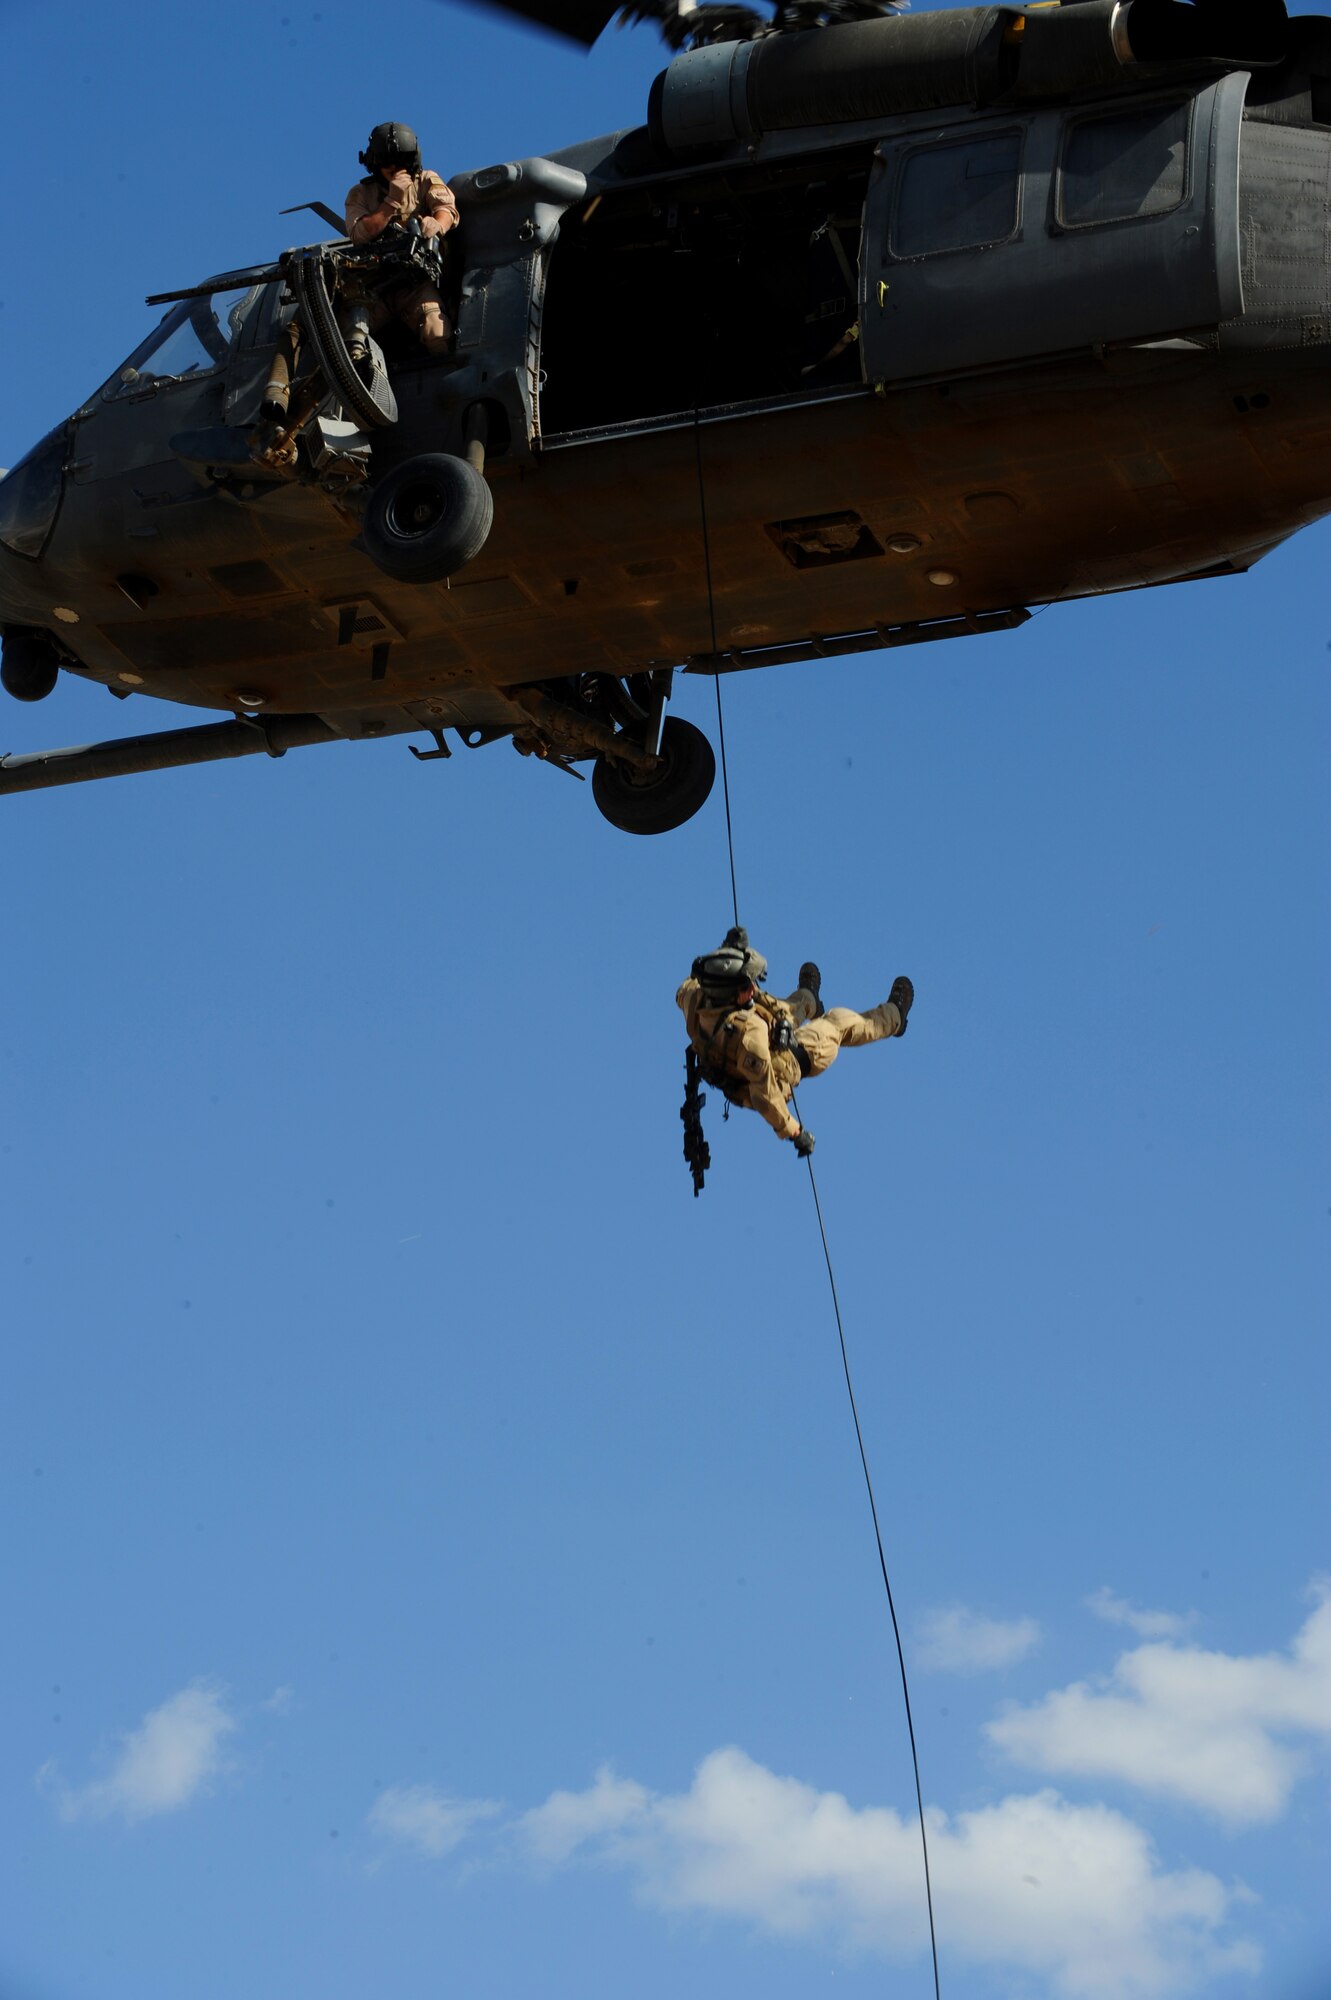 A U.S. Air Force Pararescueman from the 64th Expeditionary Rescue Squadron, Joint Base Balad, Iraq, repels from an HH-60 Pavehawk helicopter during a proficiency exercise outside of Baghdad, Iraq, April 10, 2009, in support of Operation Iraqi Freedom.  (U.S. Air Force photo by Staff Sgt. James L. Harper Jr.)